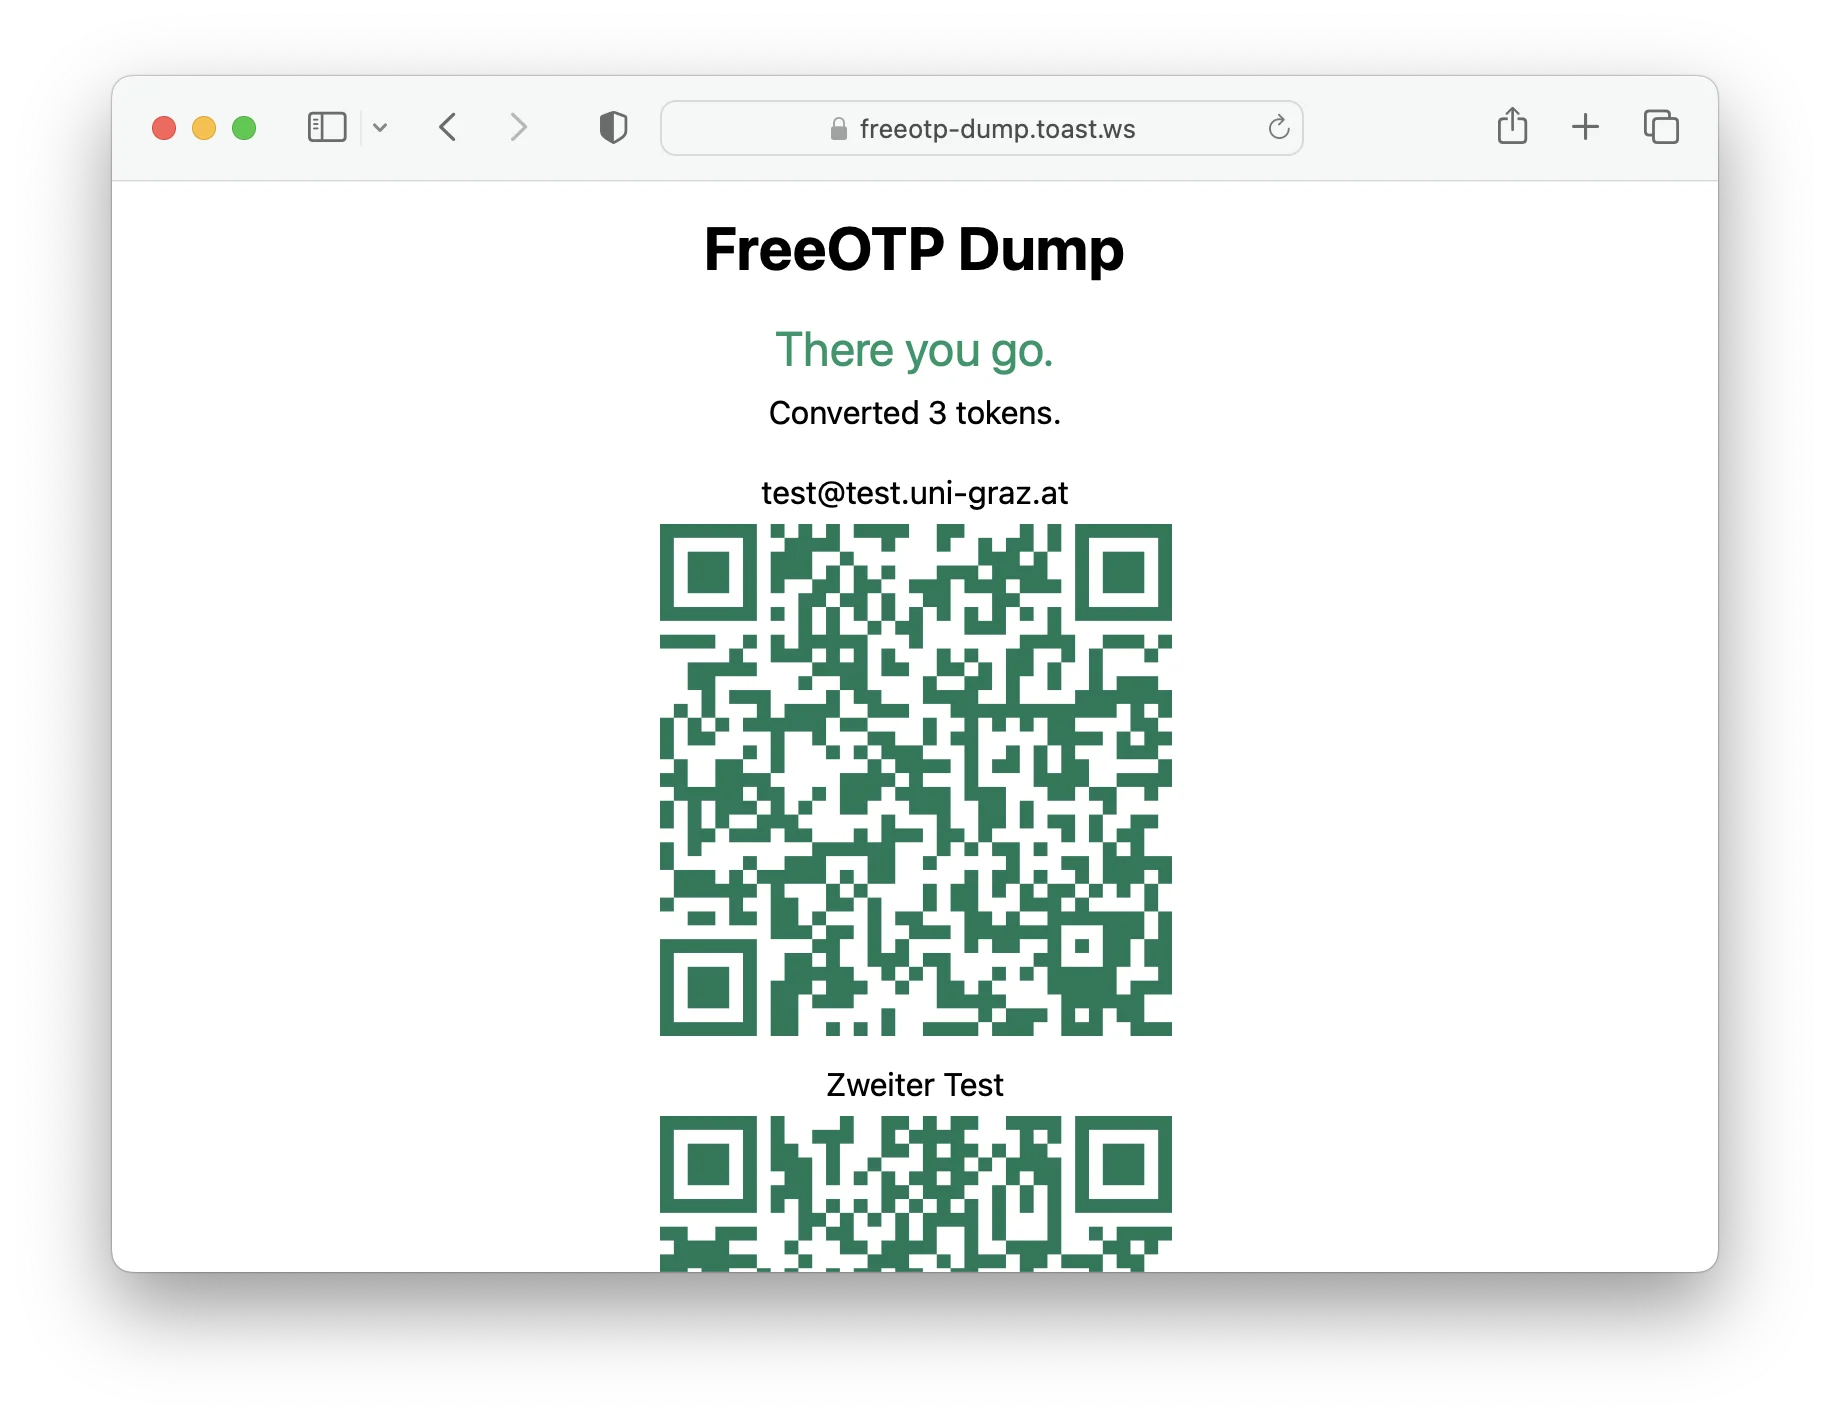 Screenshot of the application's page showing the resulting QR codes